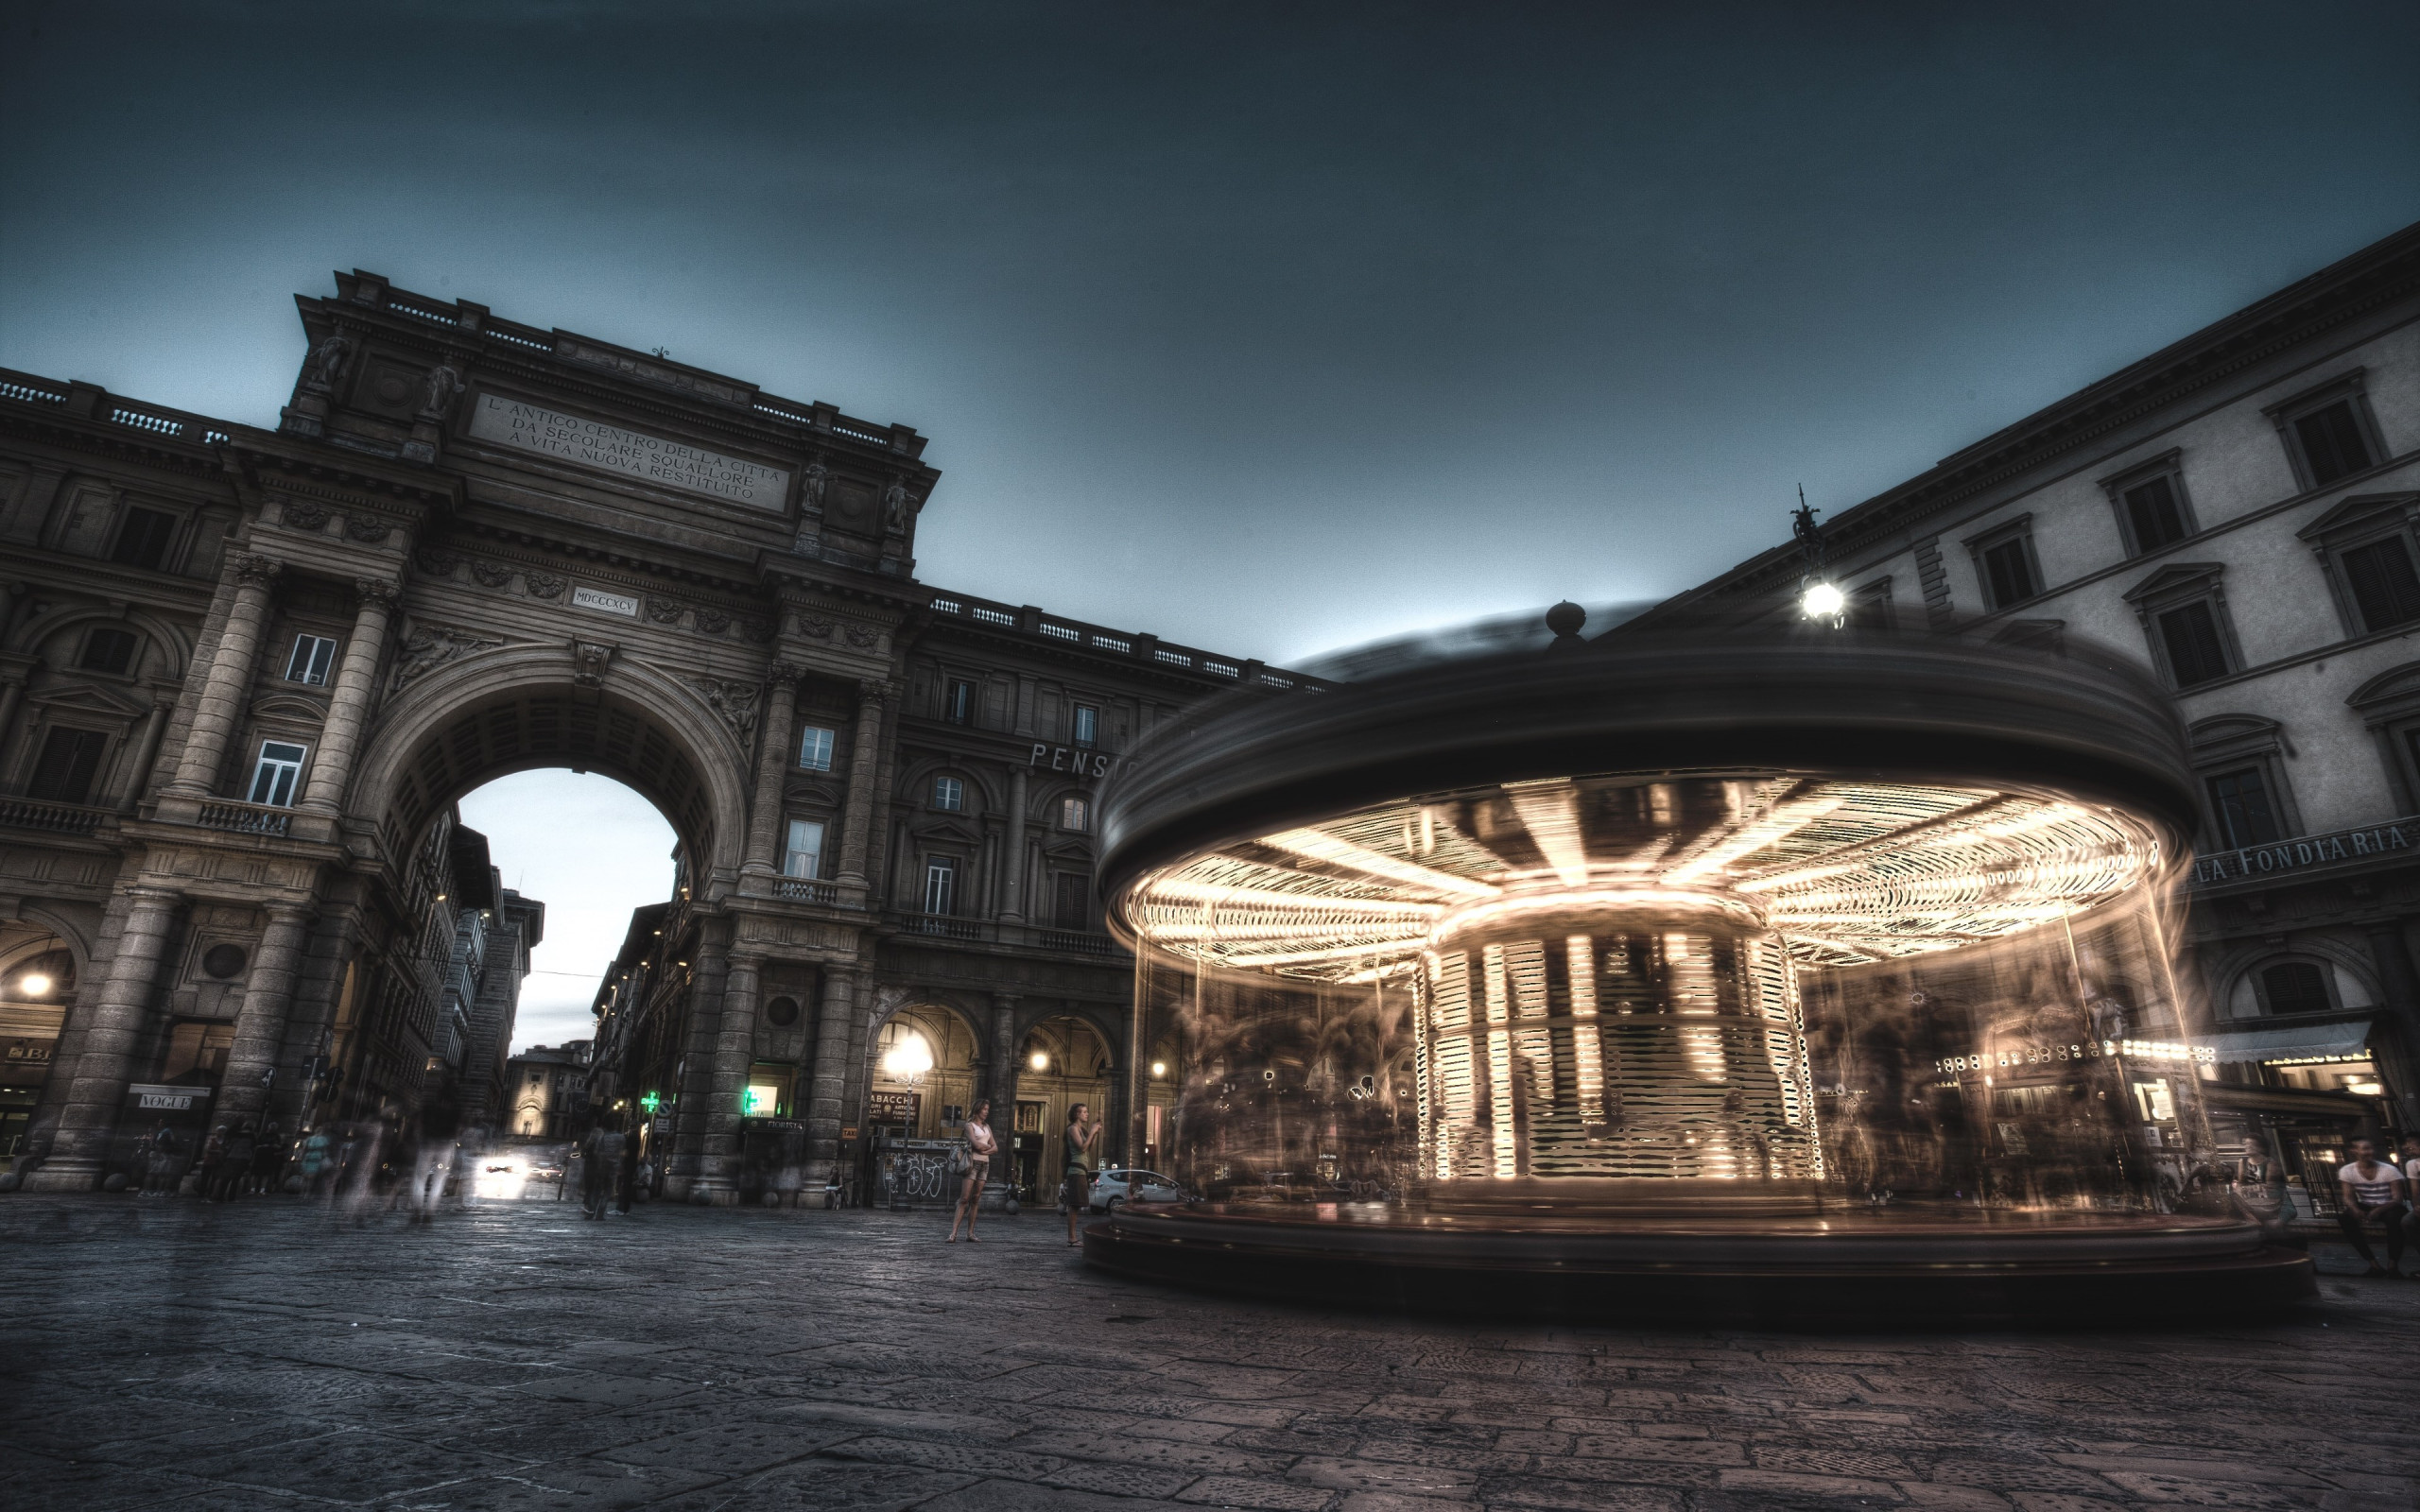 Carousel, people and buildings from Florence wallpaper 2560x1600